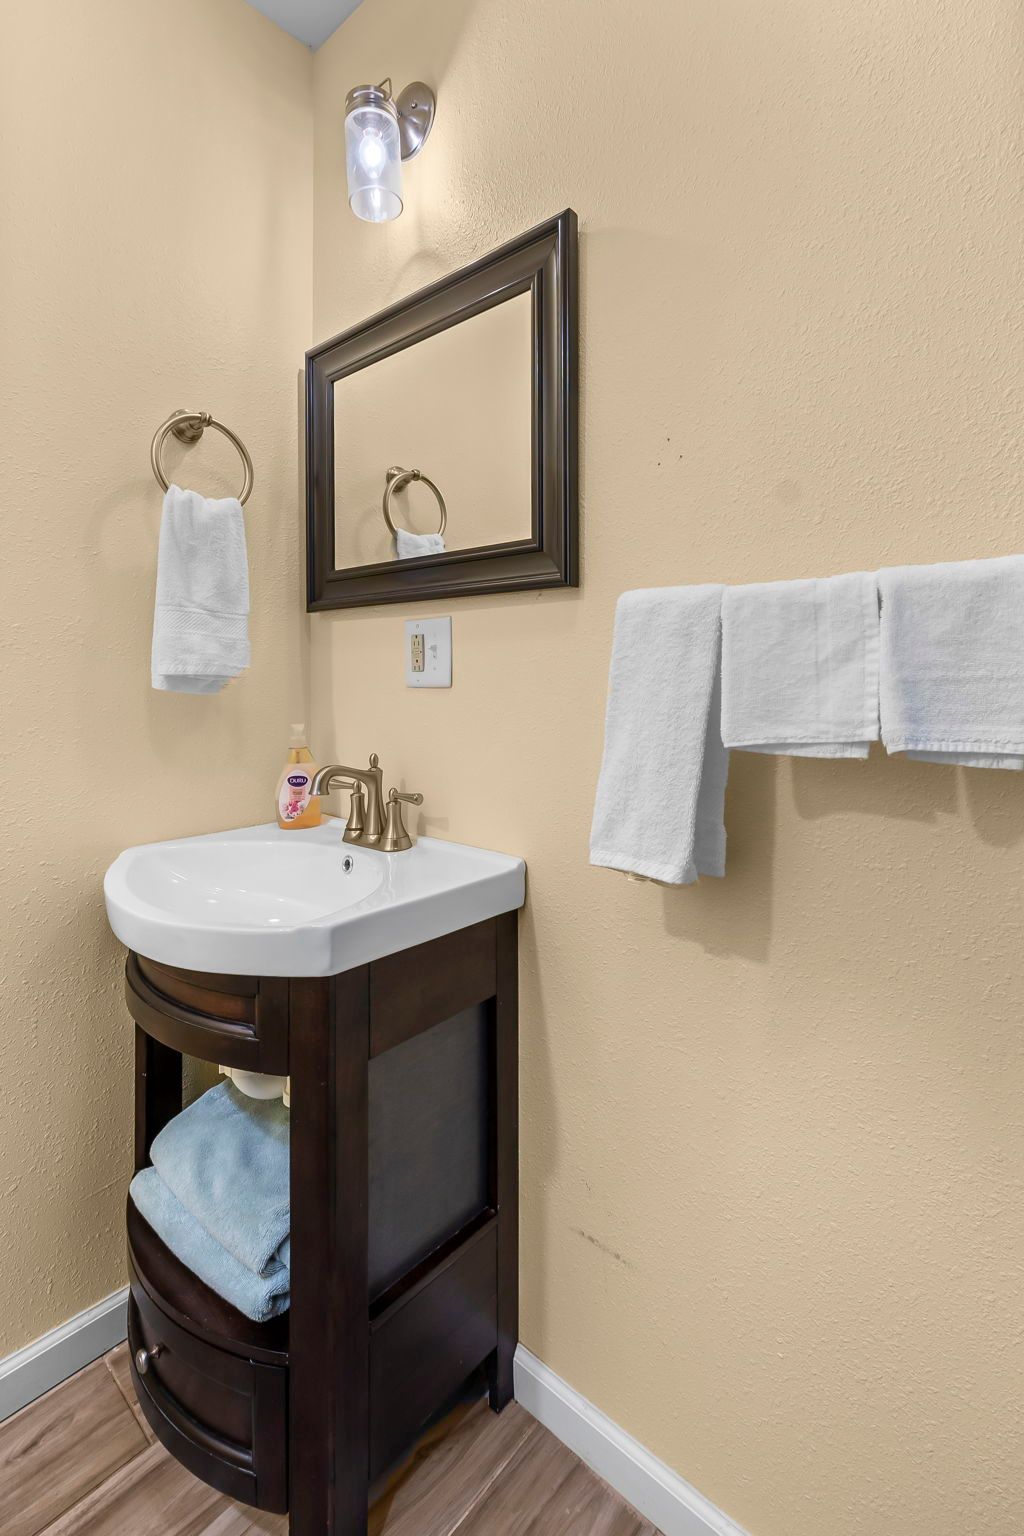 A bathroom with a sink , mirror , and towels hanging on the wall.